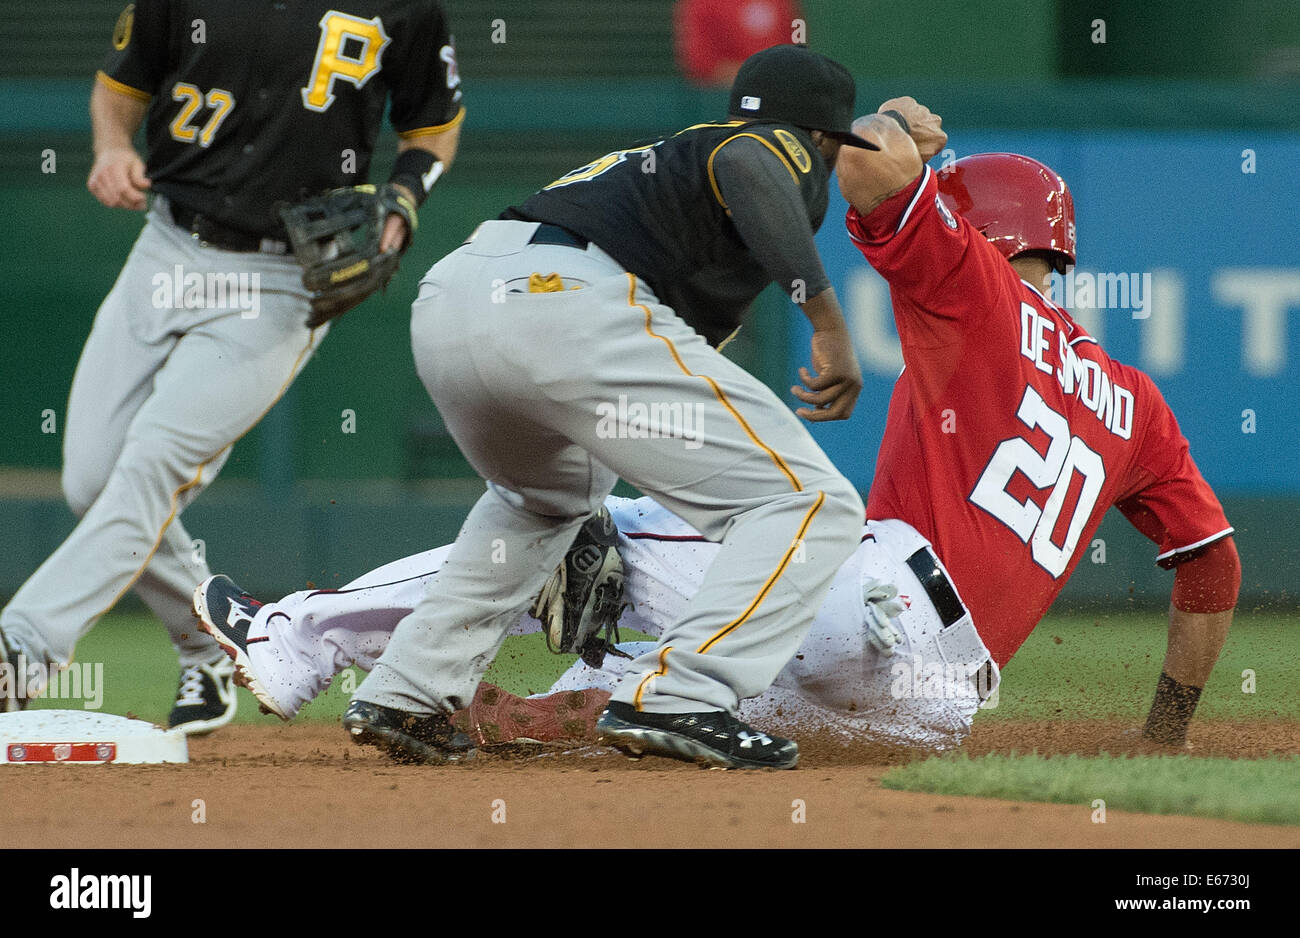 Washington, DC, USA. 16th Aug, 2014. Washington Nationals shortstop Ian Desmond (20) is tagged out attempting to steal second base by Pittsburgh Pirates shortstop Josh Harrison (5) during the first inning of their game at Nationals Park in Washington, D.C, Saturday, August 16, 2014. Credit:  Harry E. Walker/ZUMA Wire/Alamy Live News Stock Photo